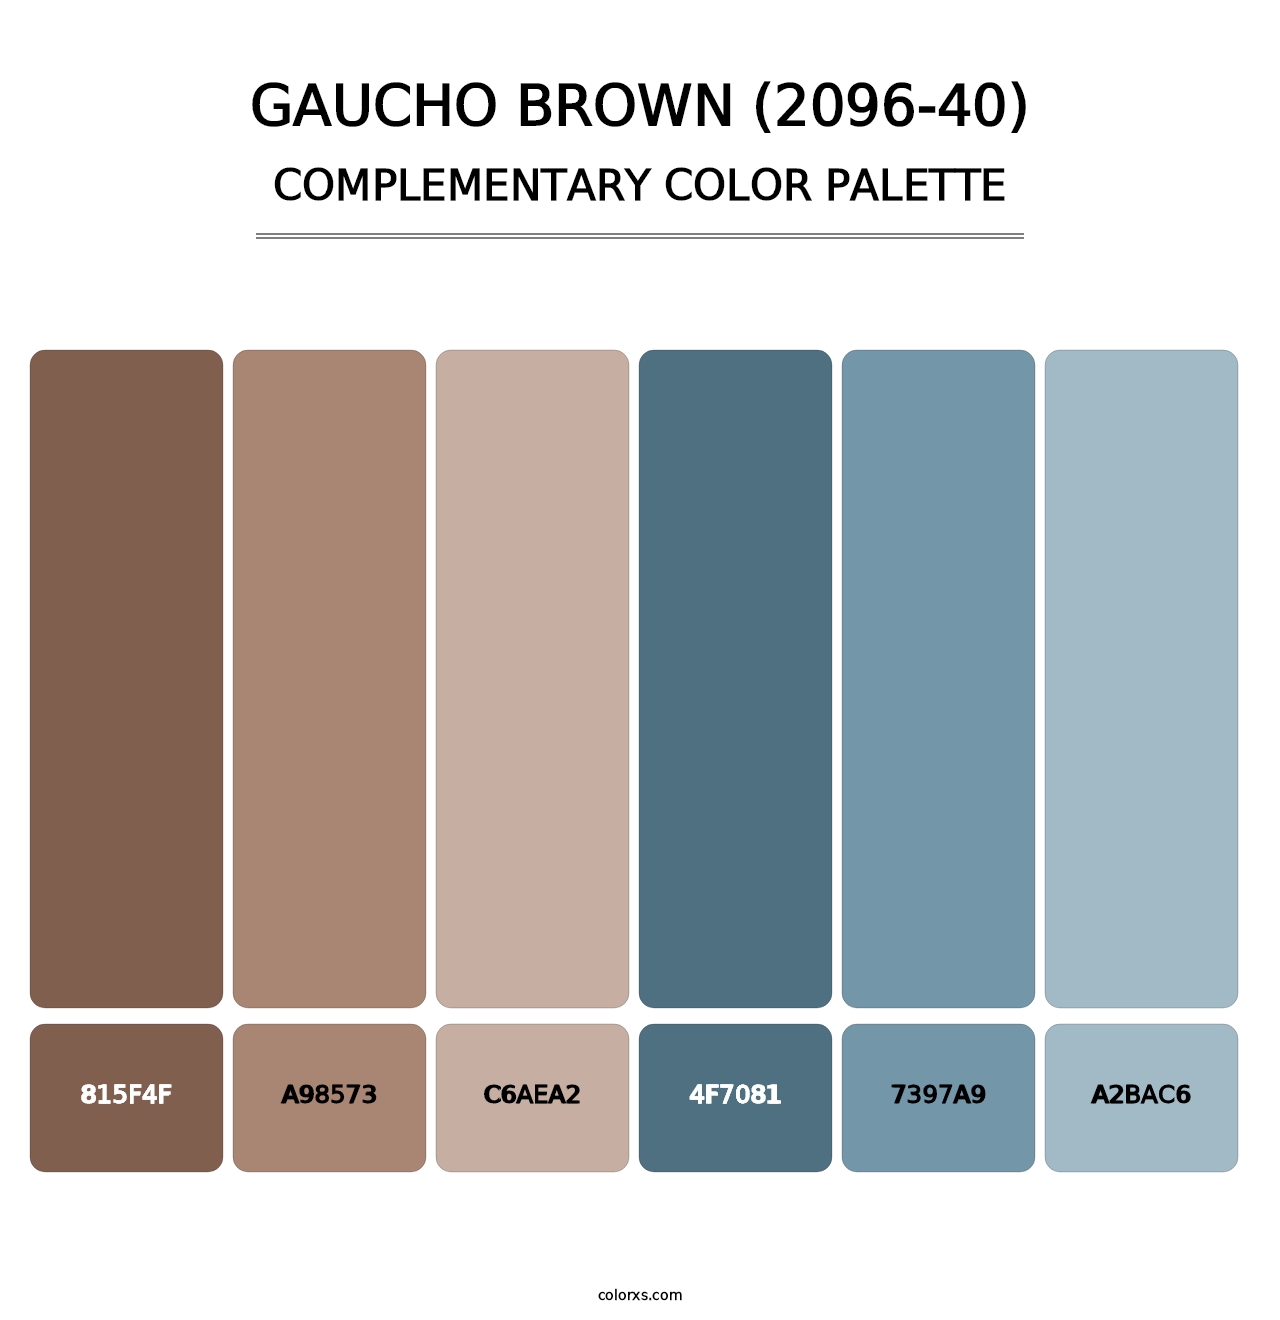 Gaucho Brown (2096-40) - Complementary Color Palette